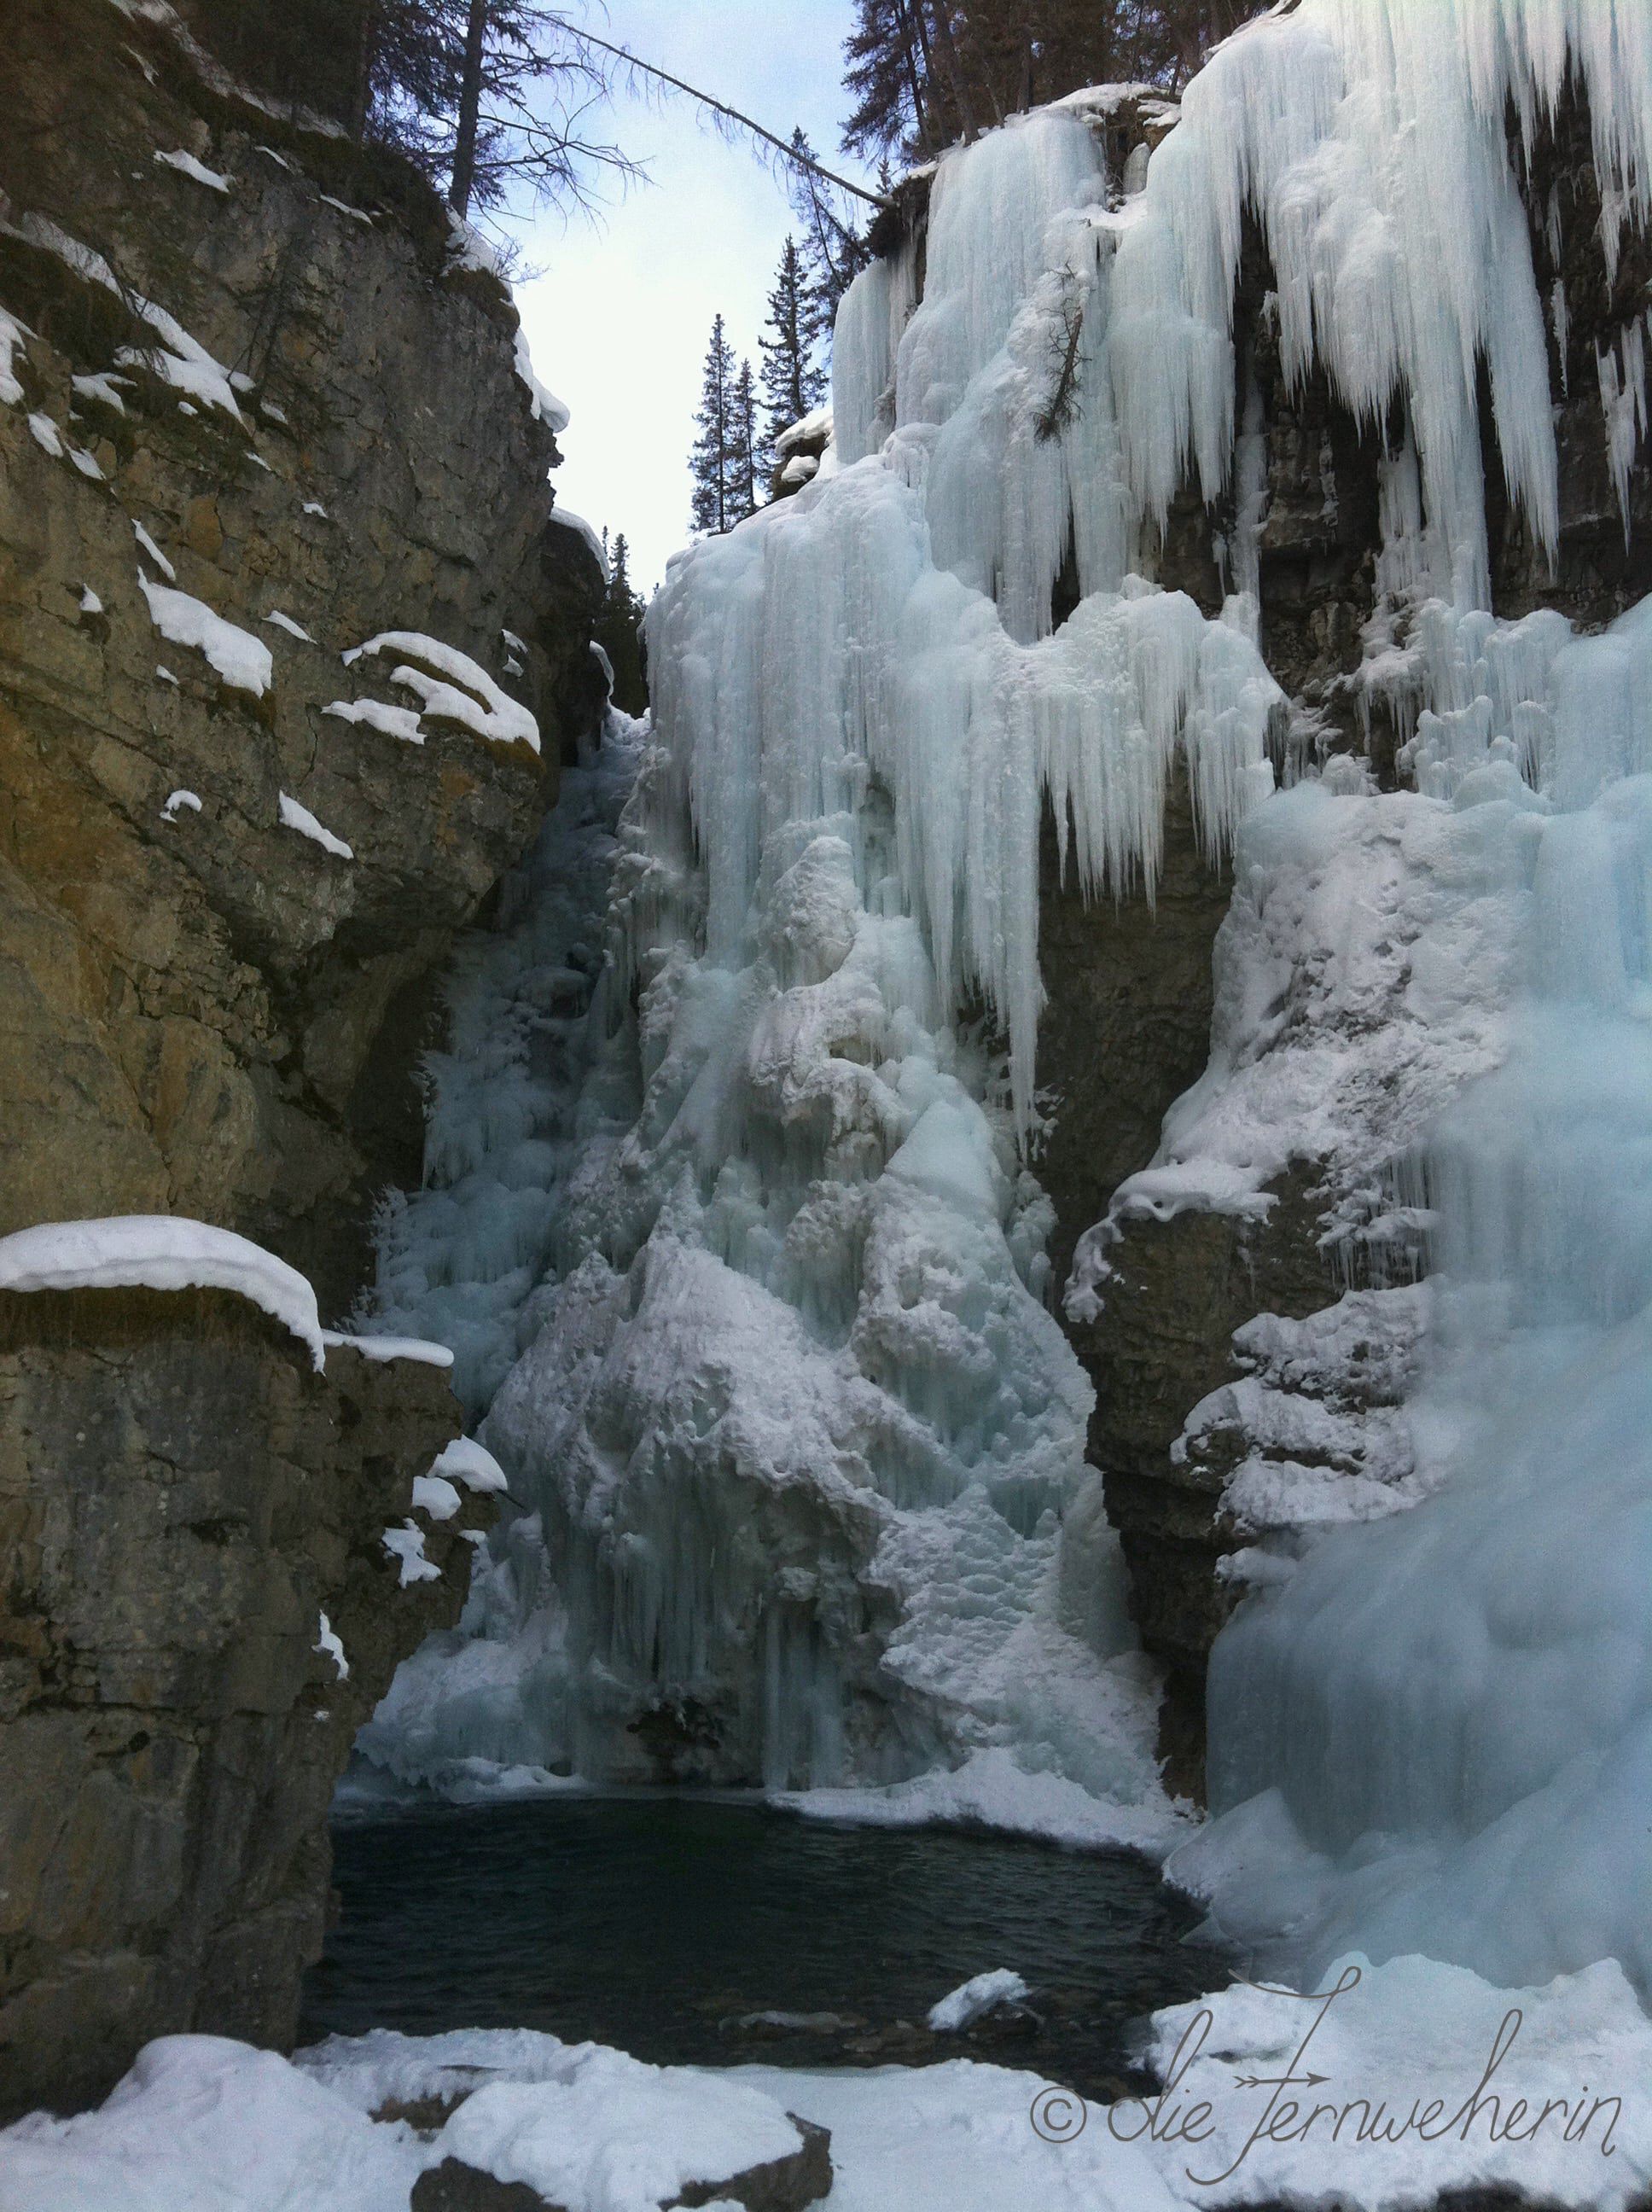 Winter in Banff National Park: the waterfalls at Johnston Canyon are completely frozen.